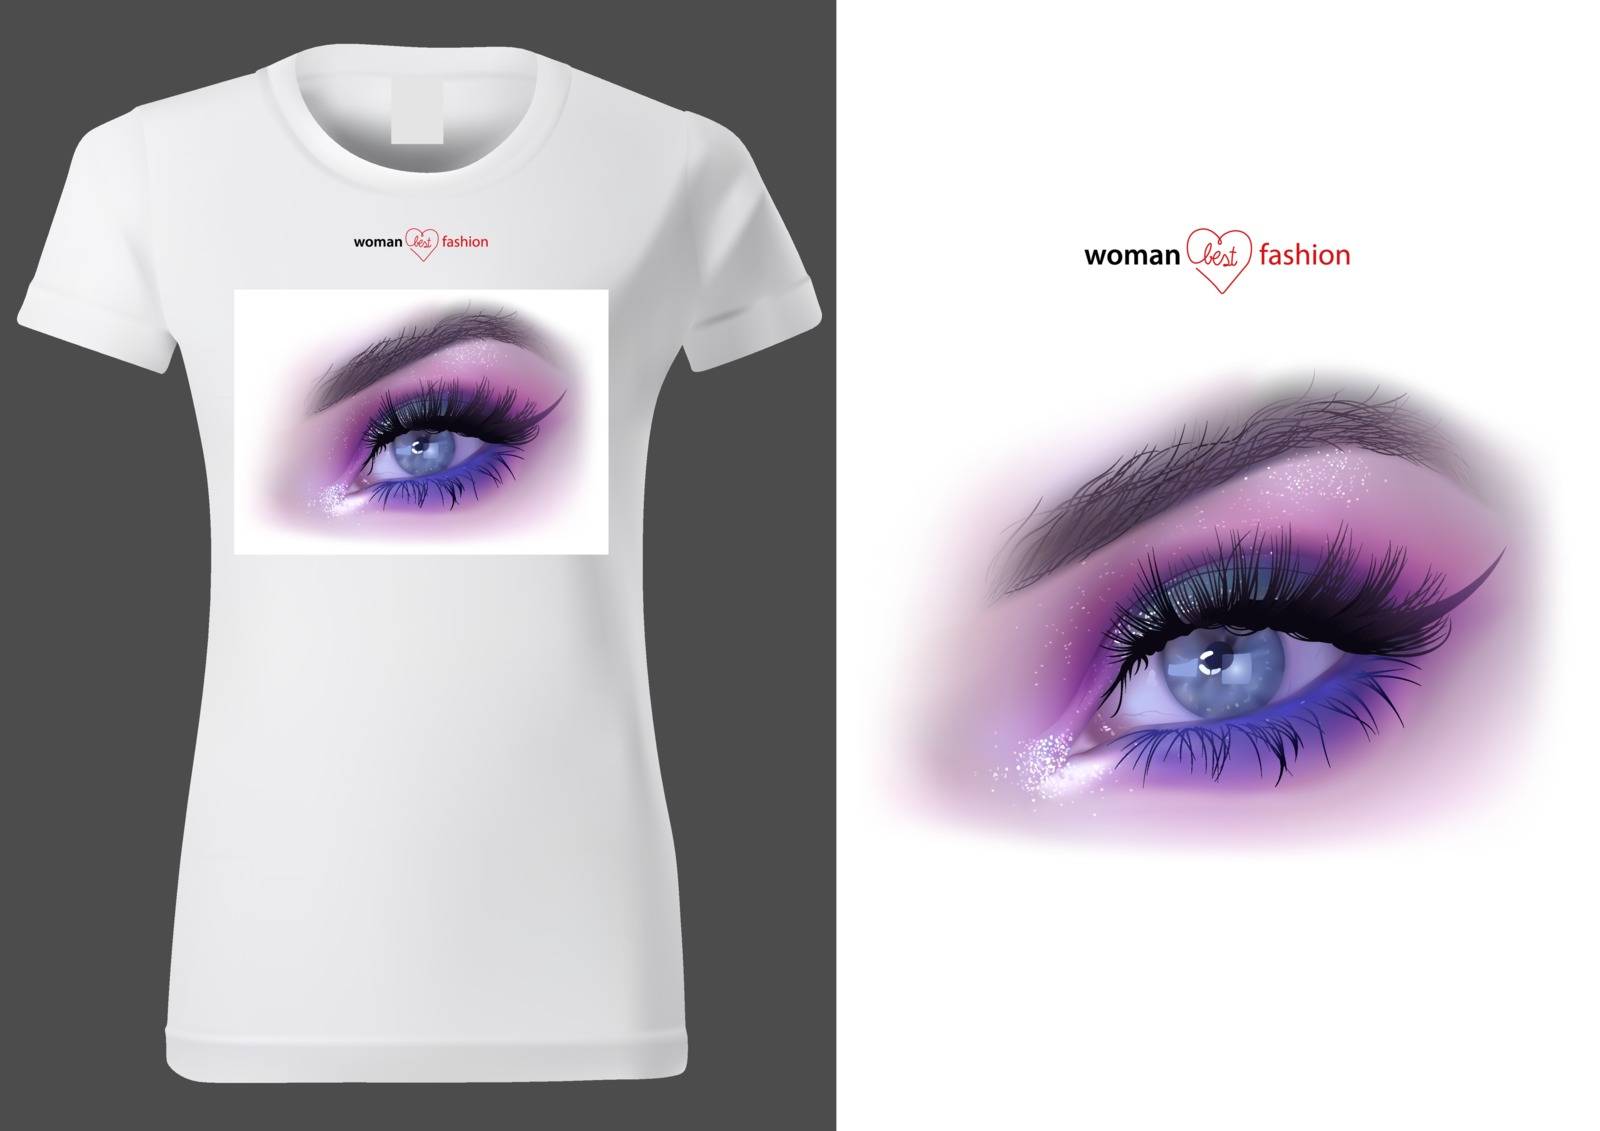 Design of Women White T-shirt with Detail of the Makeup Eye - Colored Fashion Illustration, Vector